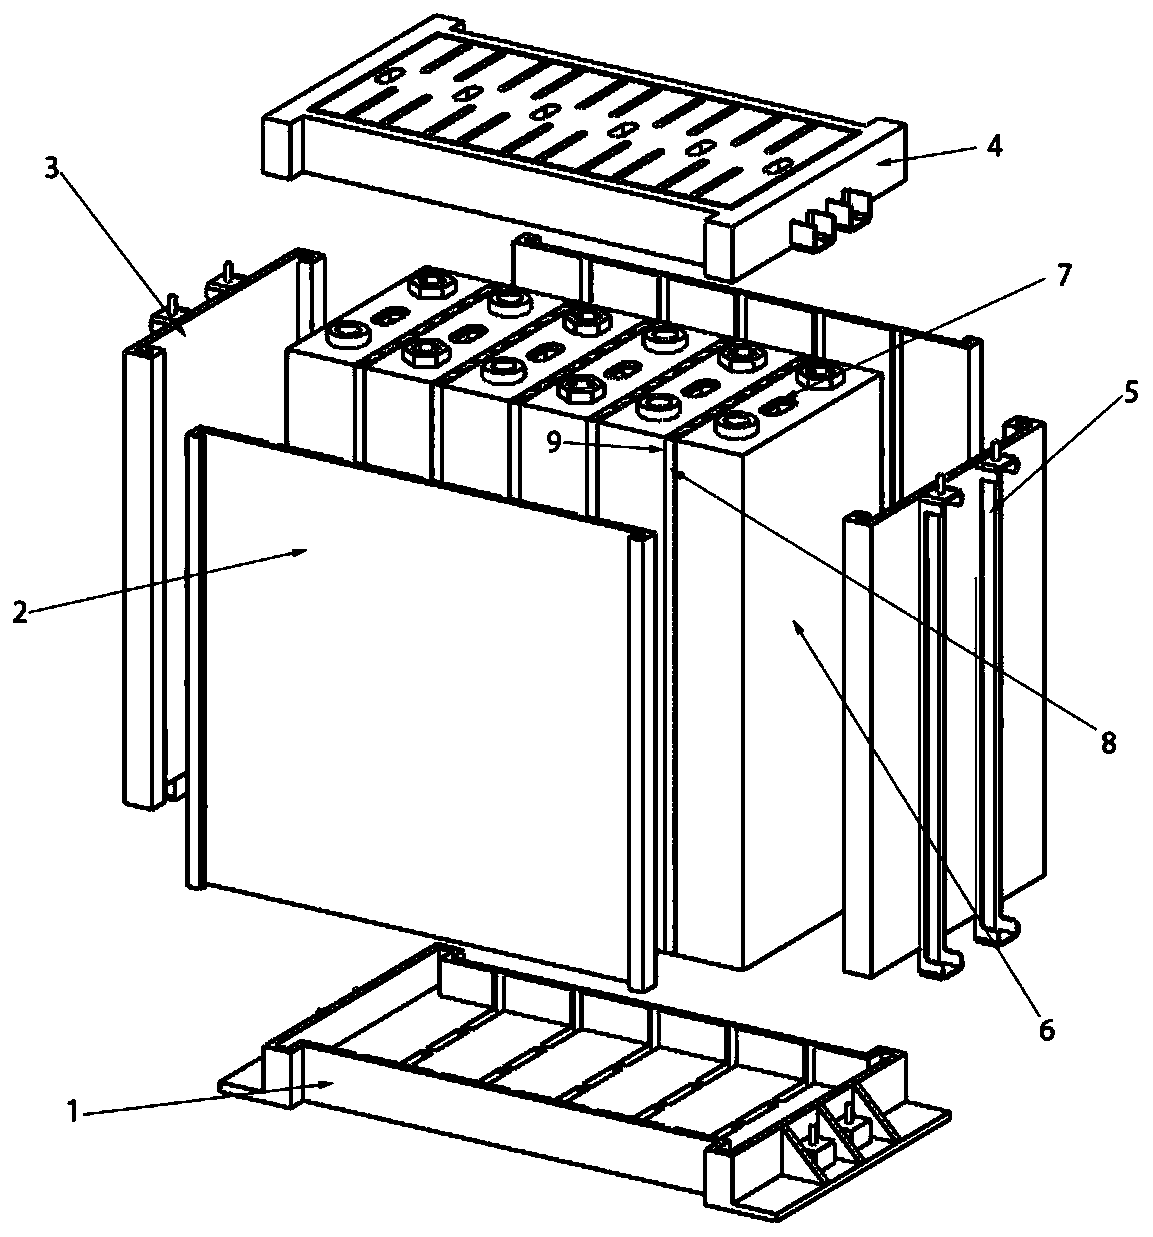 Thermal safety control battery module structure